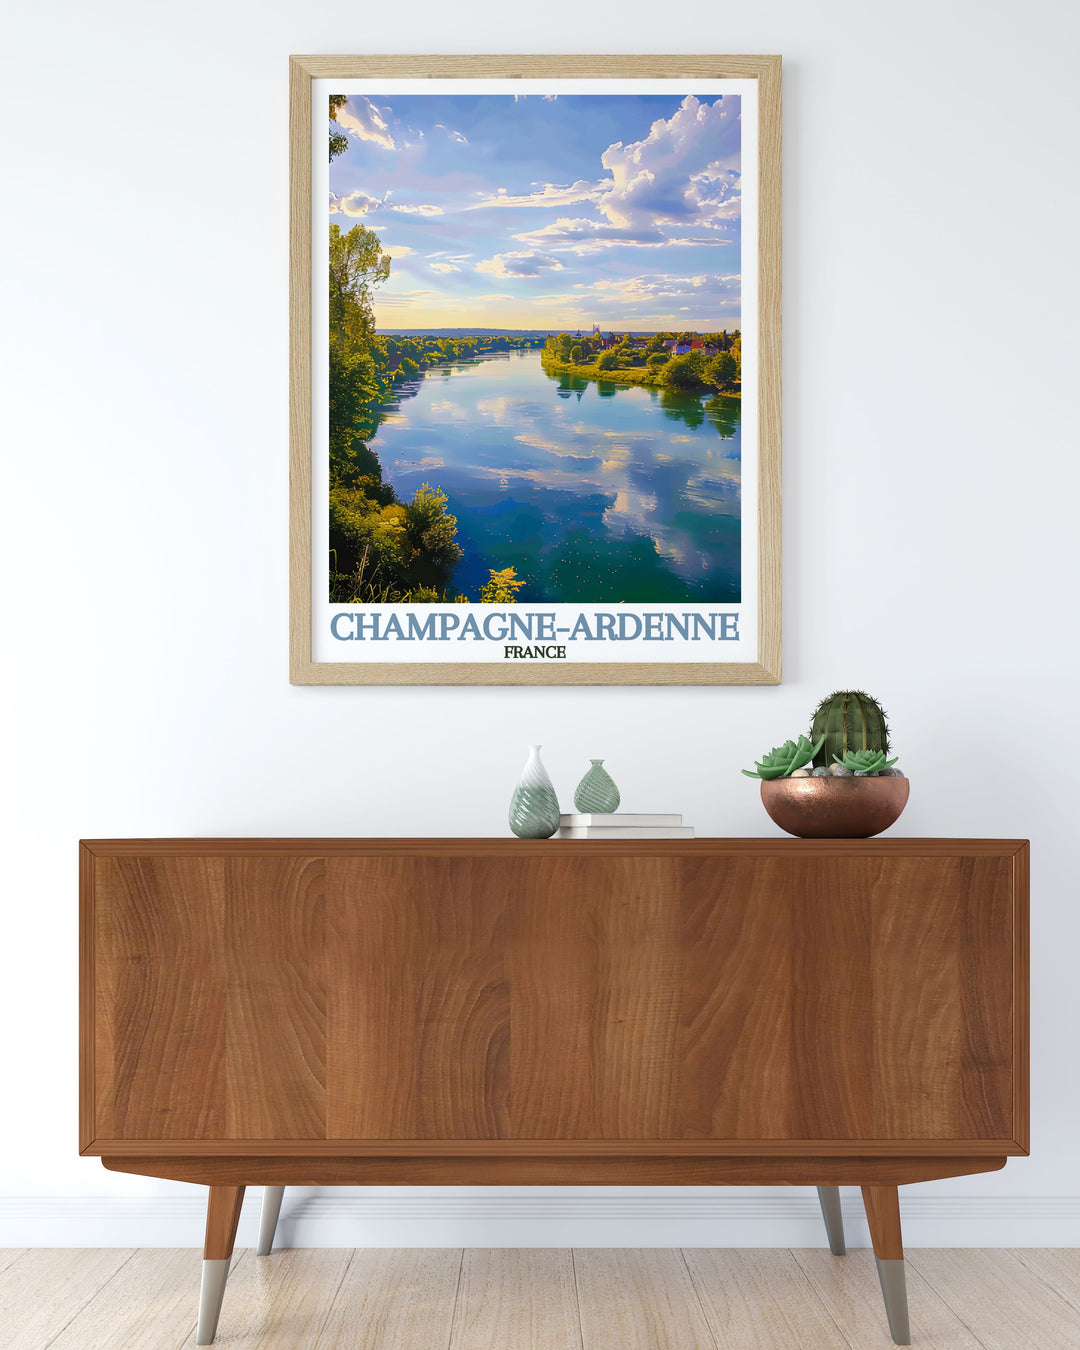 France travel print featuring the picturesque Marne River and its charming surroundings. This modern art piece is ideal for adding a touch of French elegance to your home, making it a great gift for any occasion.